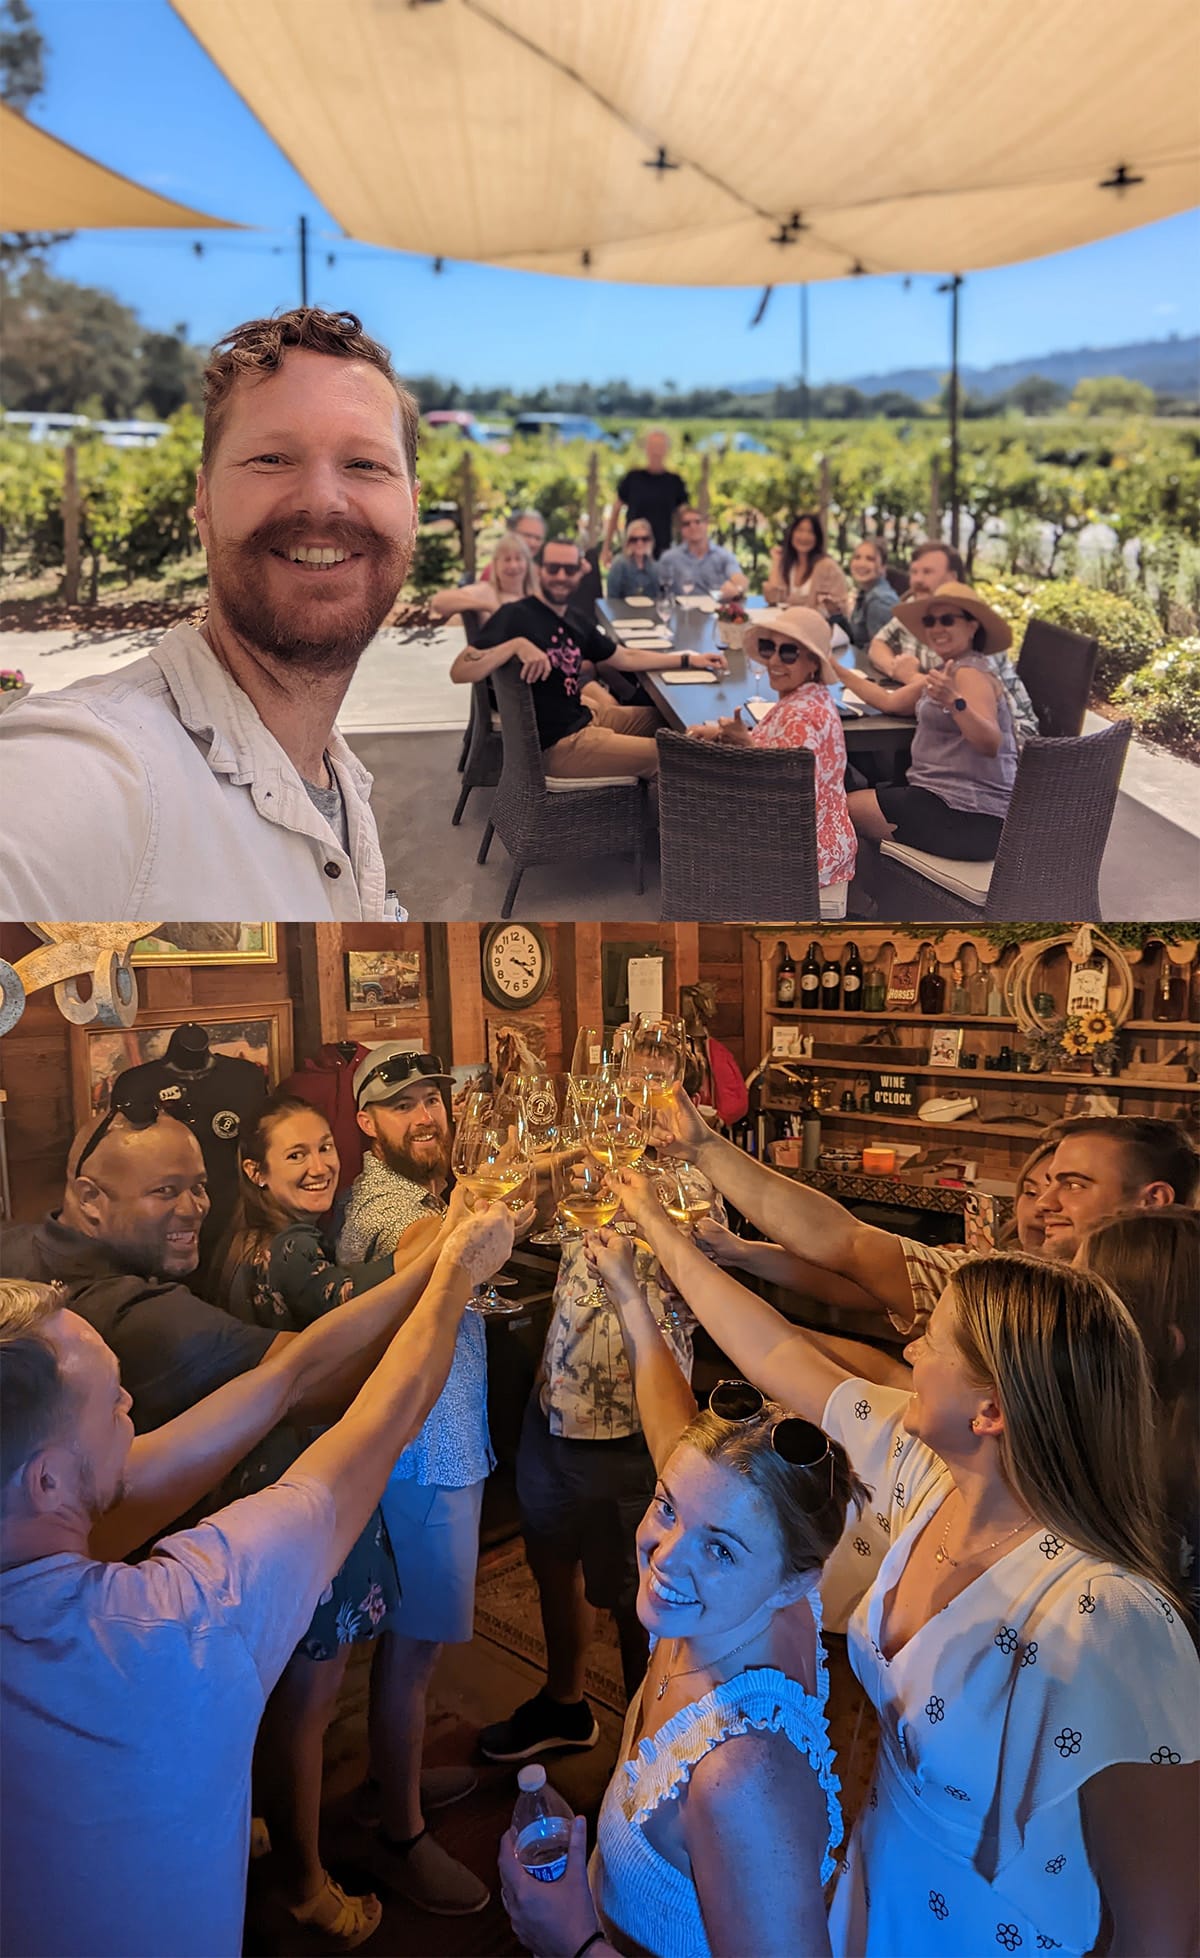 Social Group Wine Tour for Residents and Friends Of The Cove, Provided By Platypus Tours!